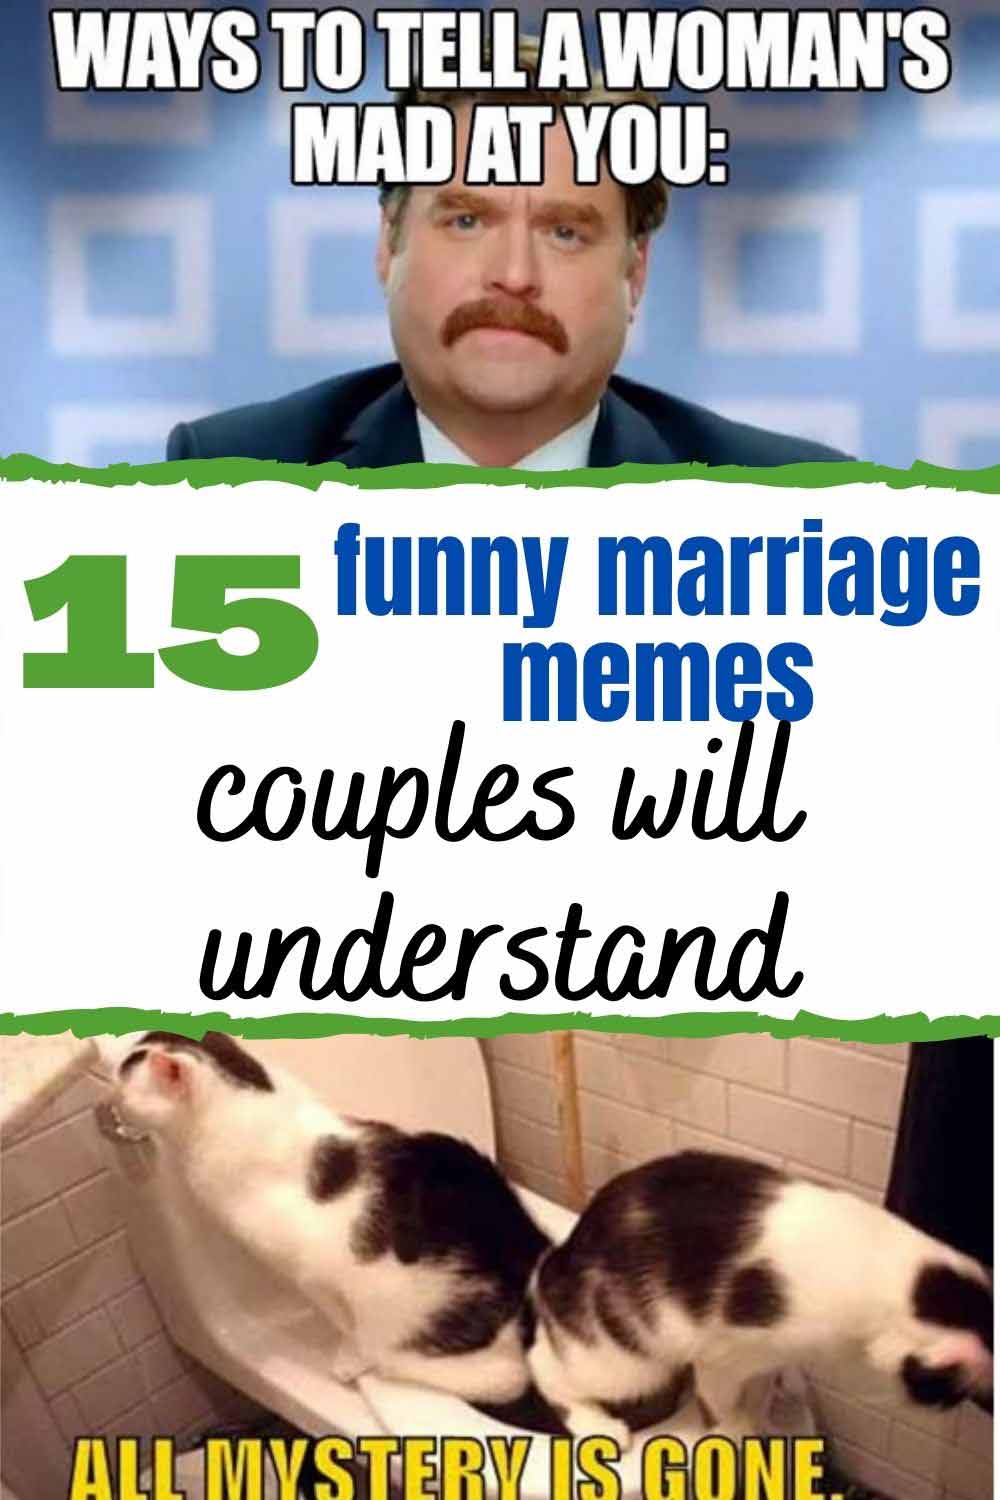 15 Funny Marriage Memes Perfectly Sum Up Married Life